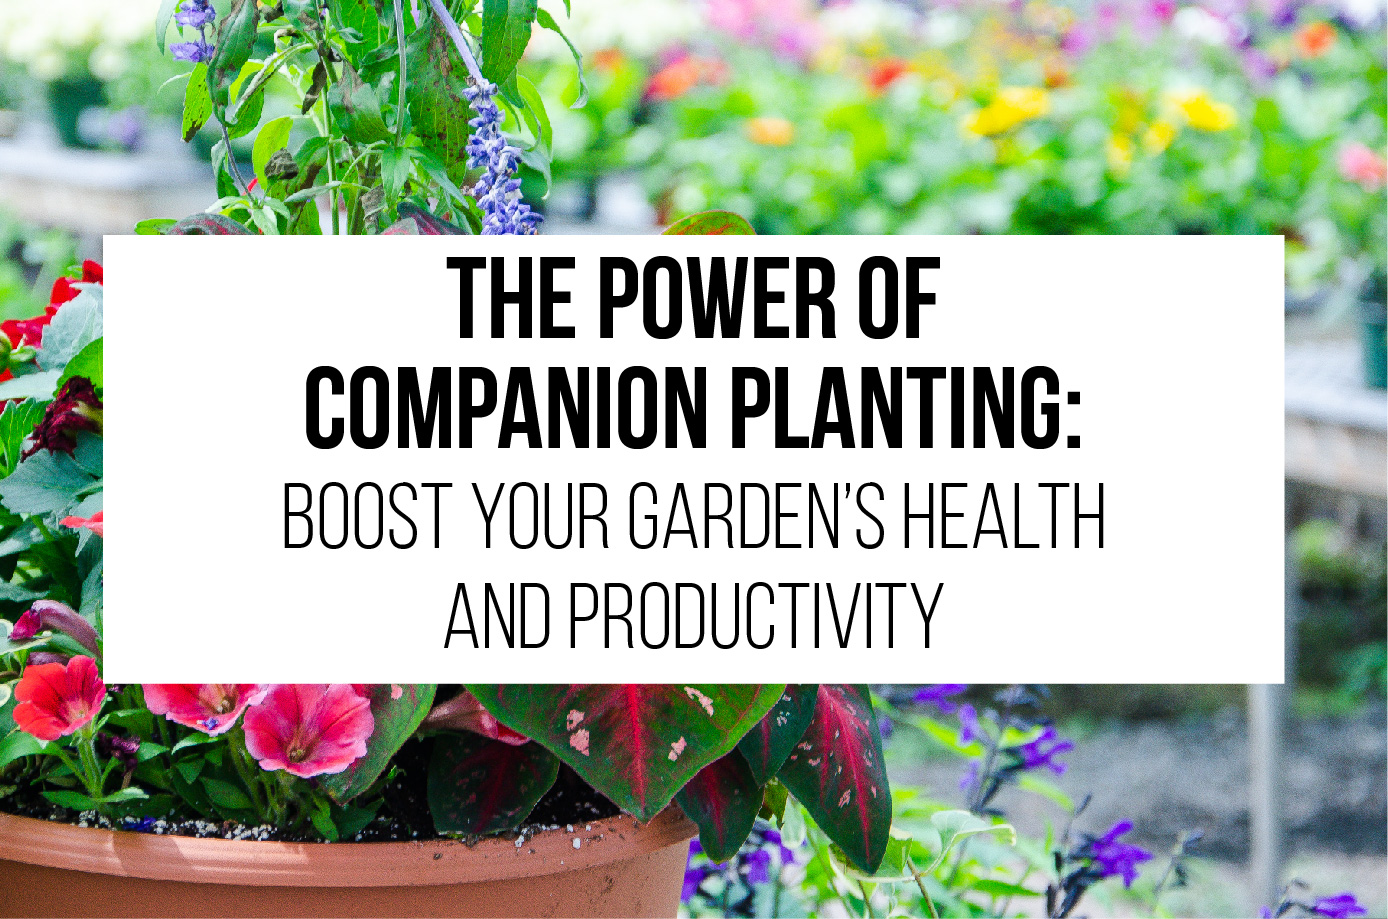 The Power of Companion Planting: Boost Your Garden's Health and Productivity